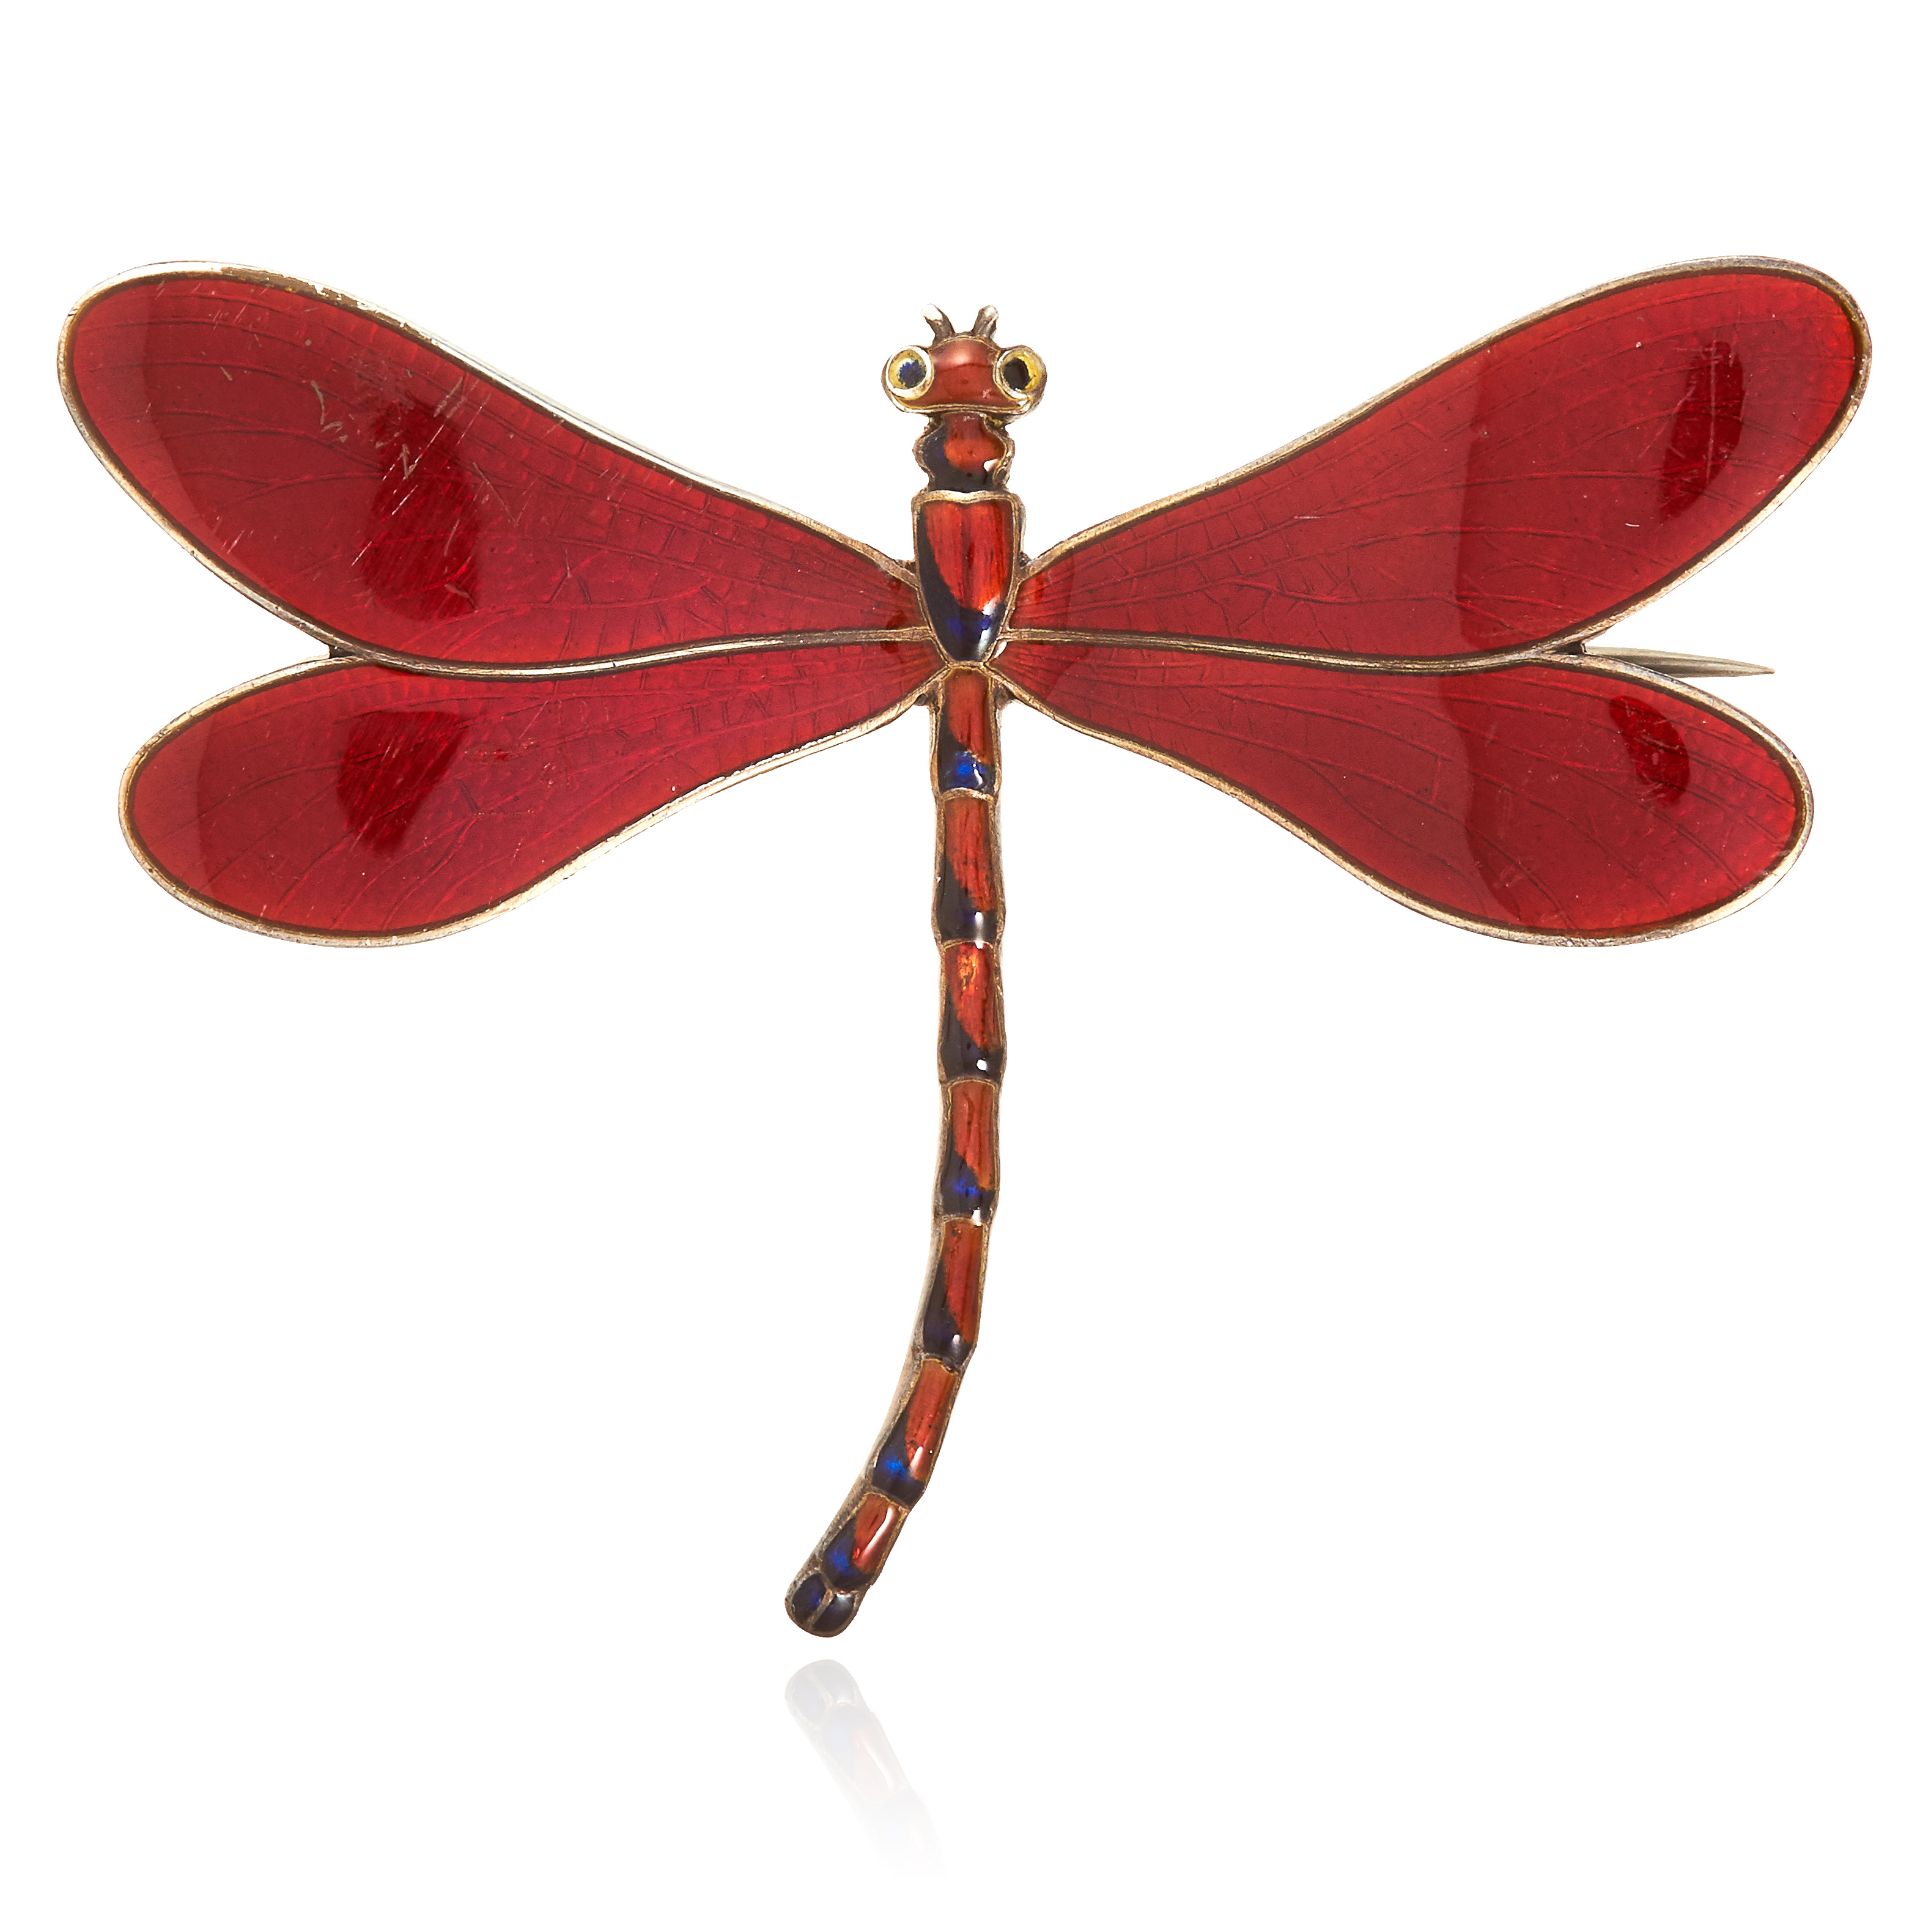 AN ANTIQUE ENAMELLED DRAGONFLY BROOCH in sterling silver, designed as a dragonfly, its body